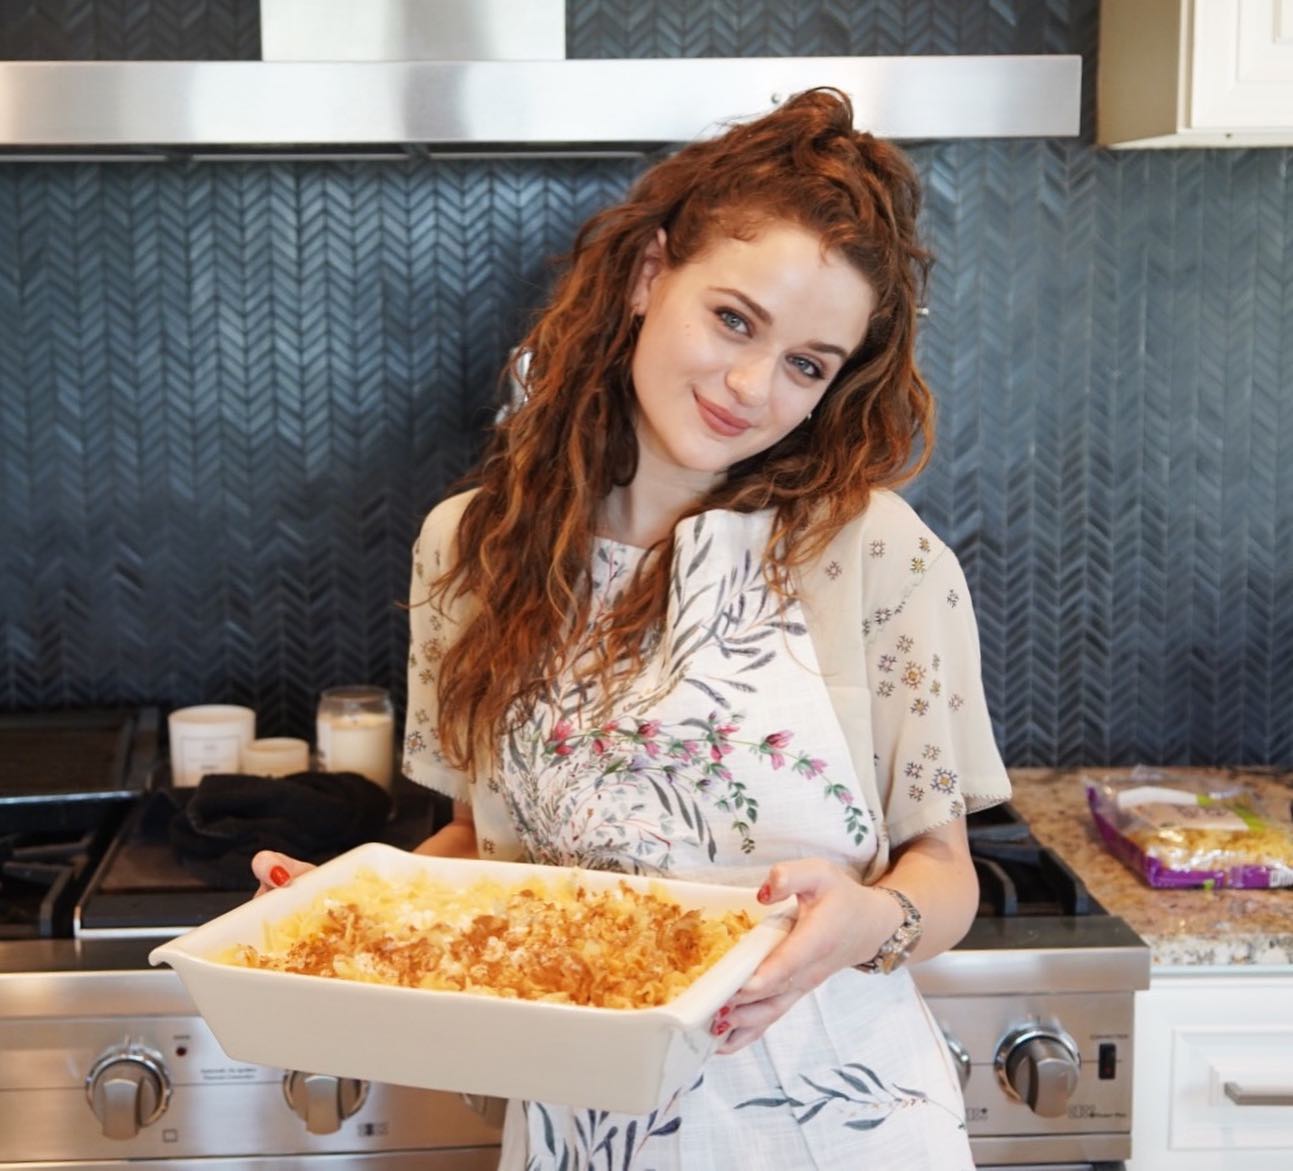 Photos n°2 : Joey King Gets Down in the Kitchen!